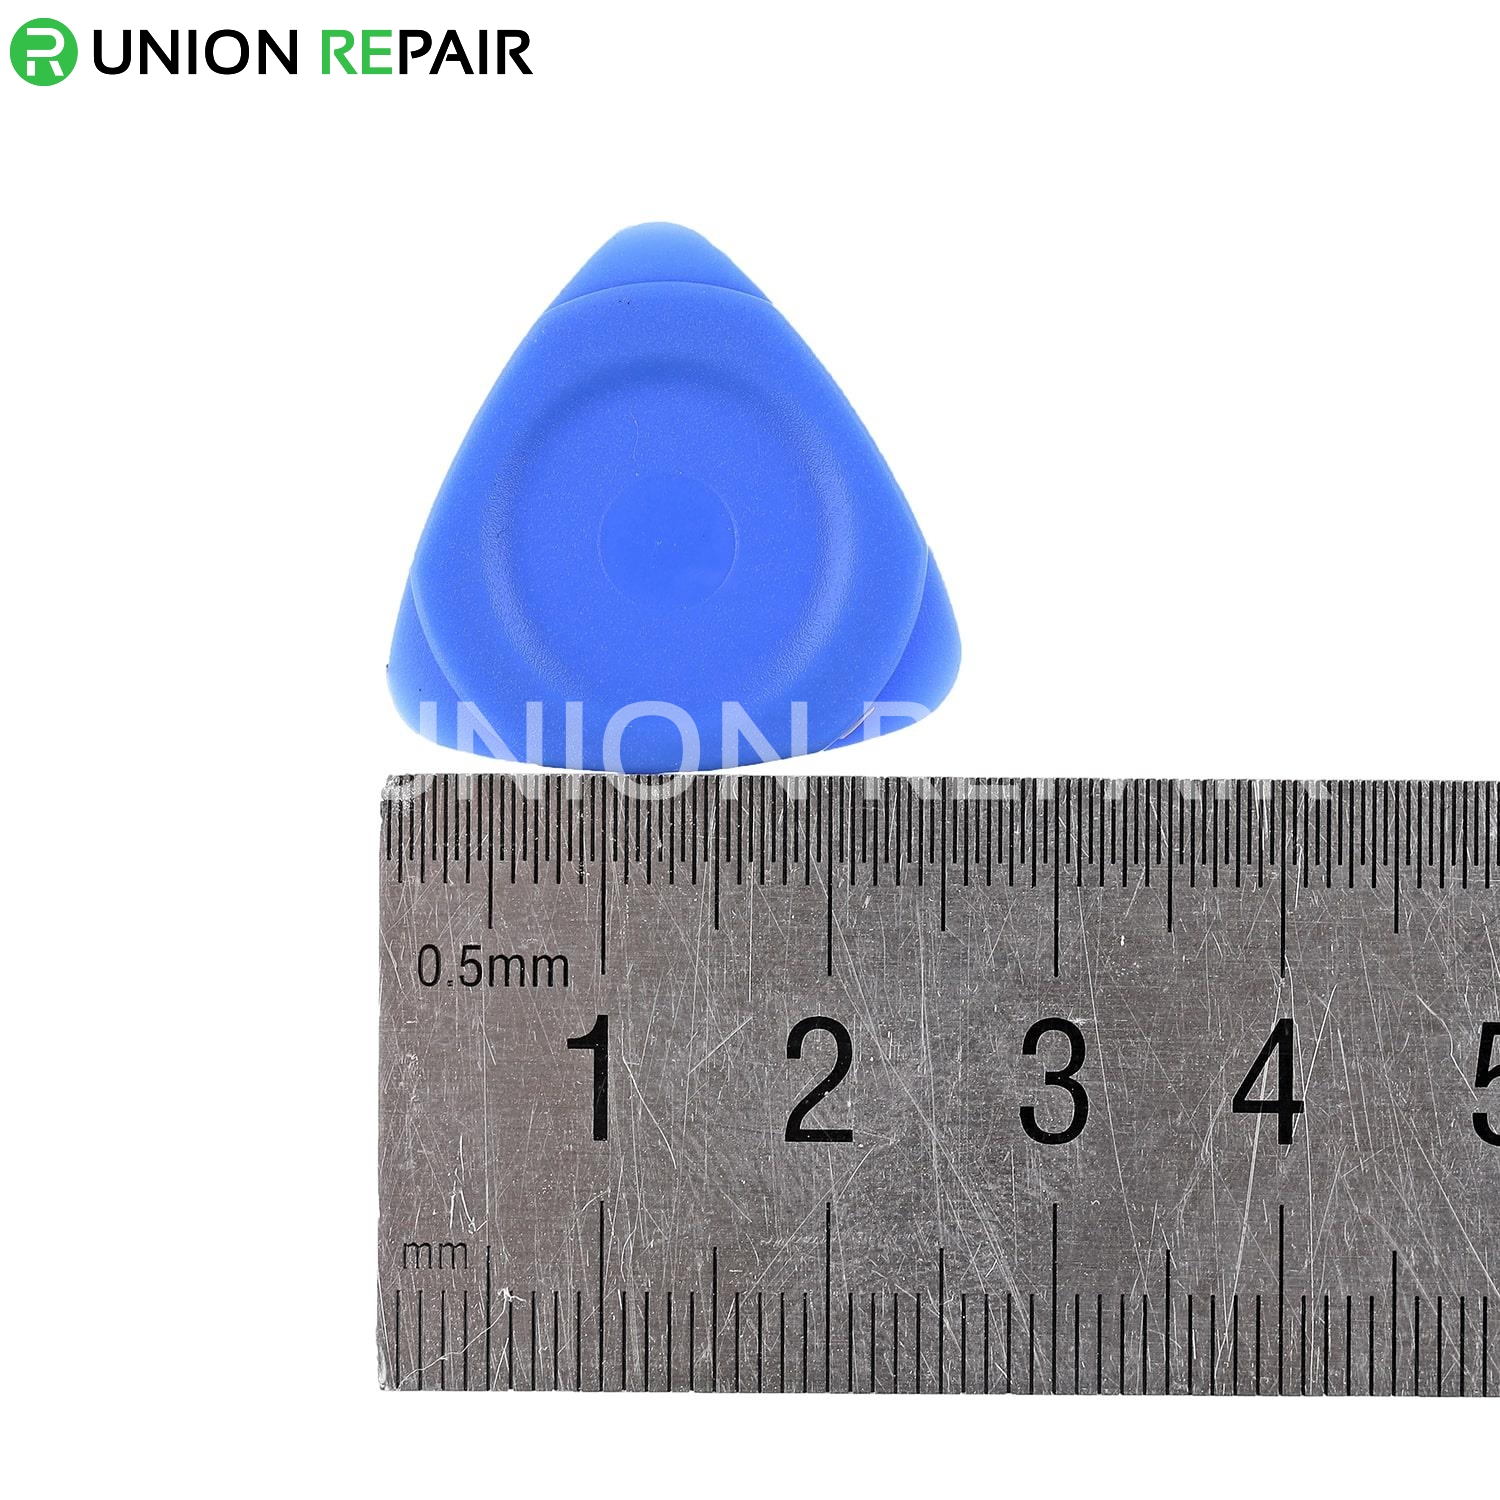 Kaisi Blue Guitar Pick Disassembly Tool Big Size, Condition: Small Size